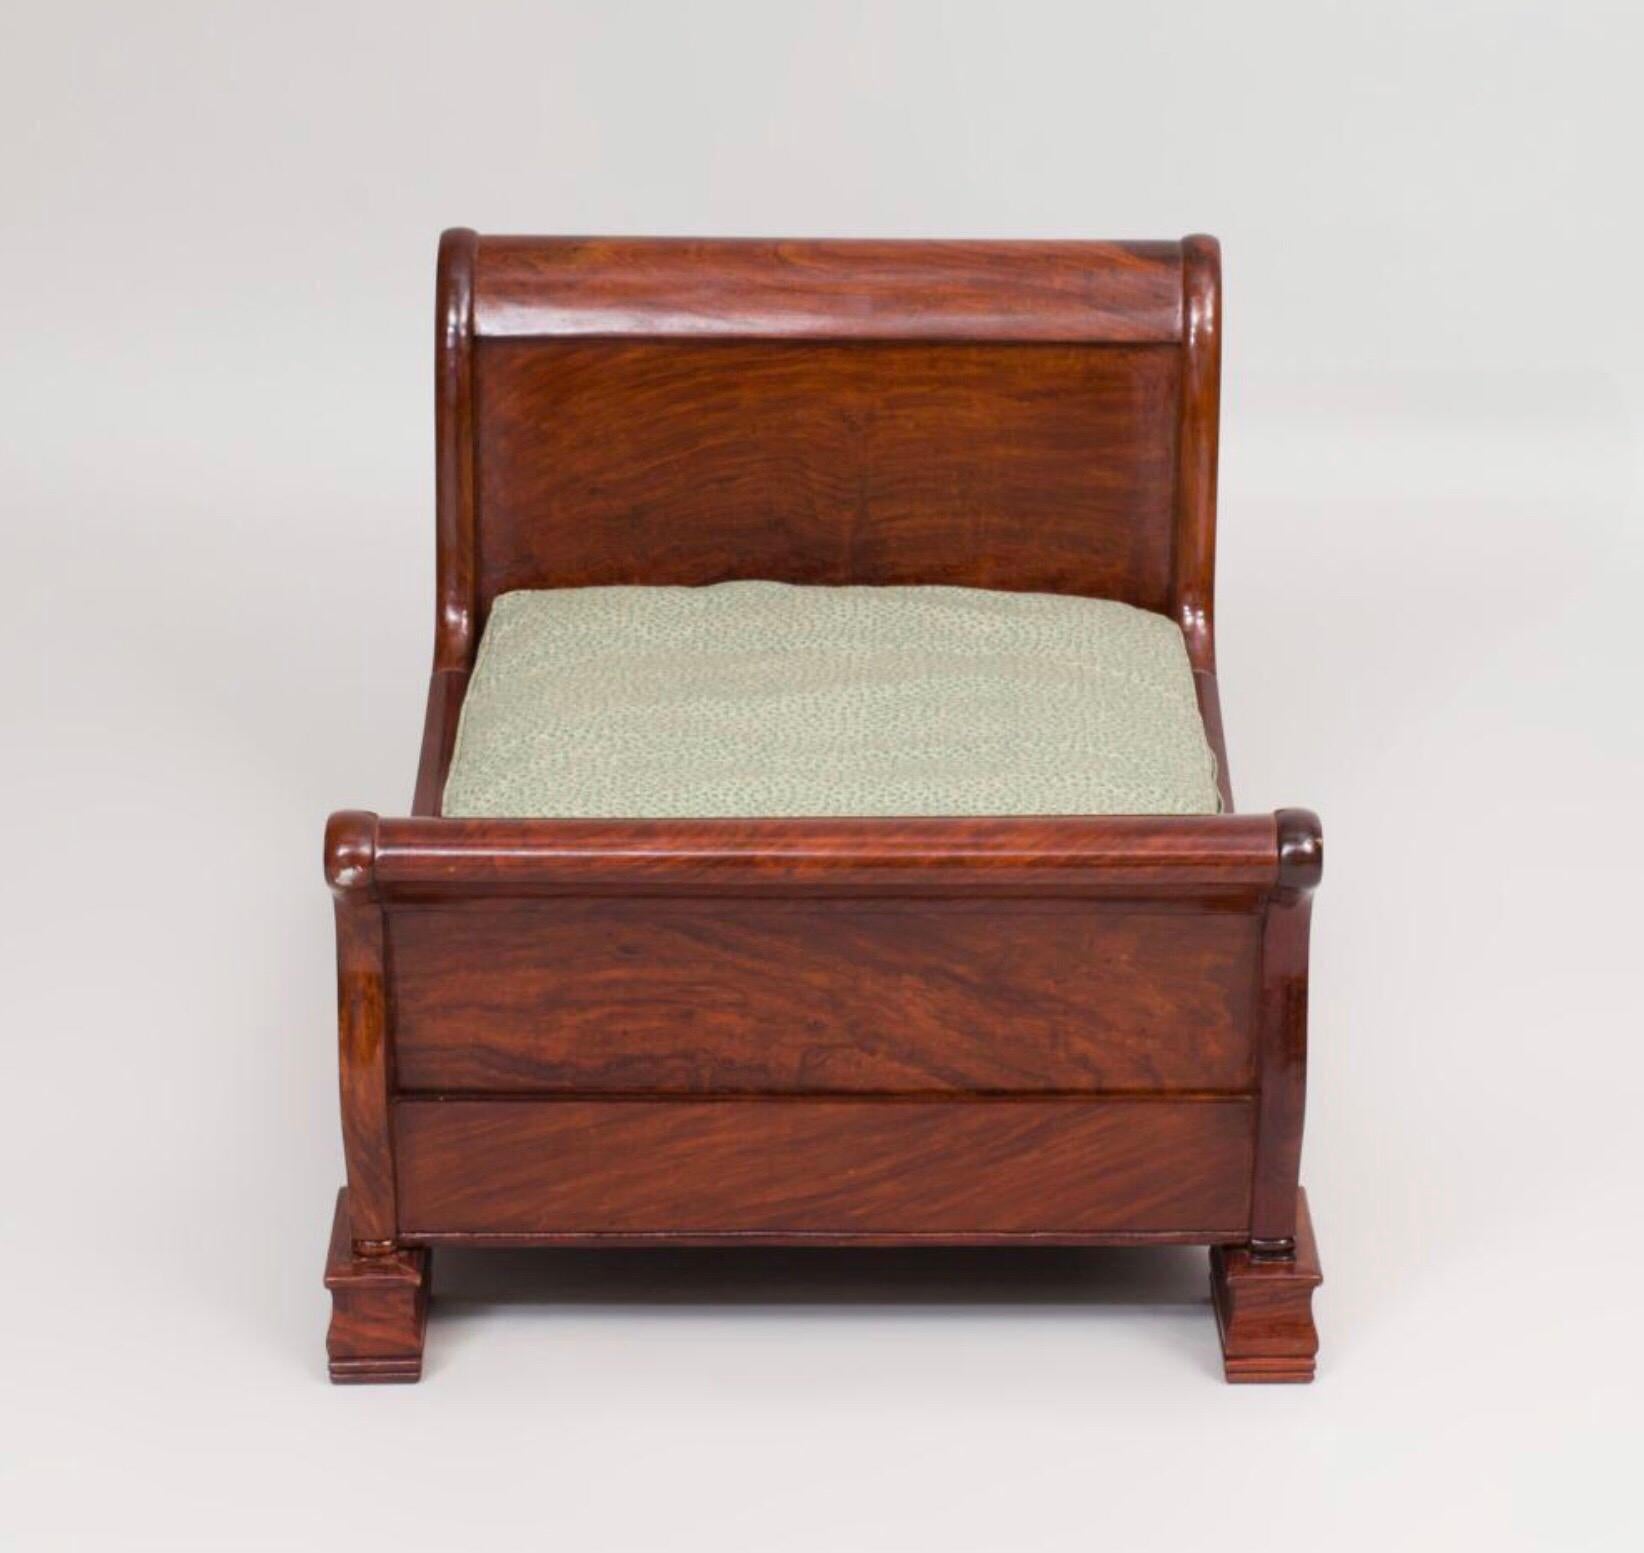 The diminutive mahogany sleigh bed with green and white upholstery.